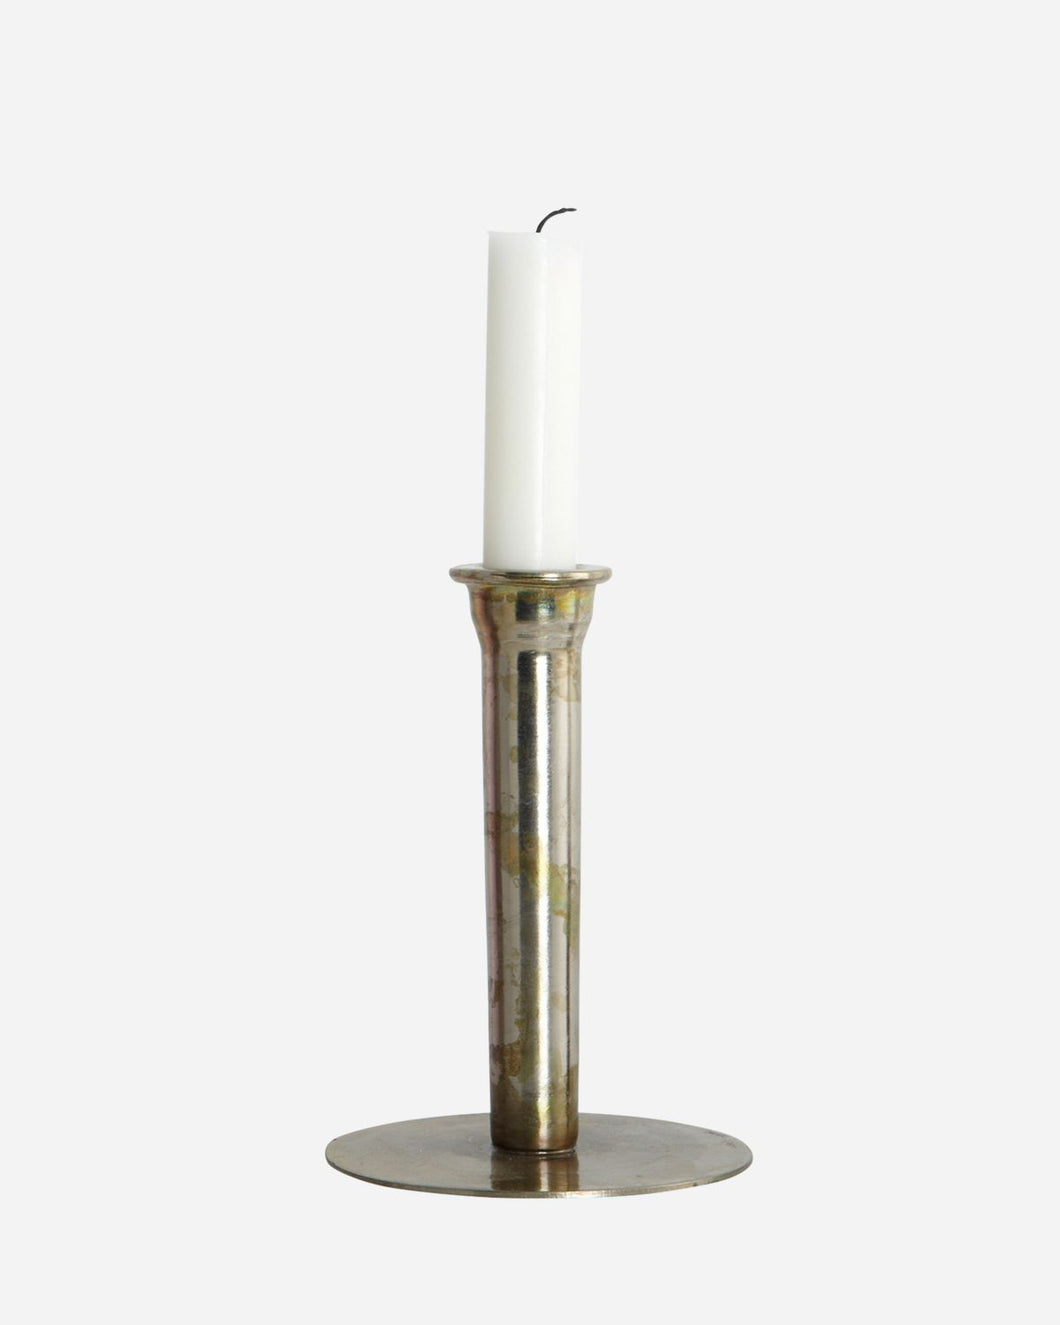 Candle stand in Antique Metallic finsh